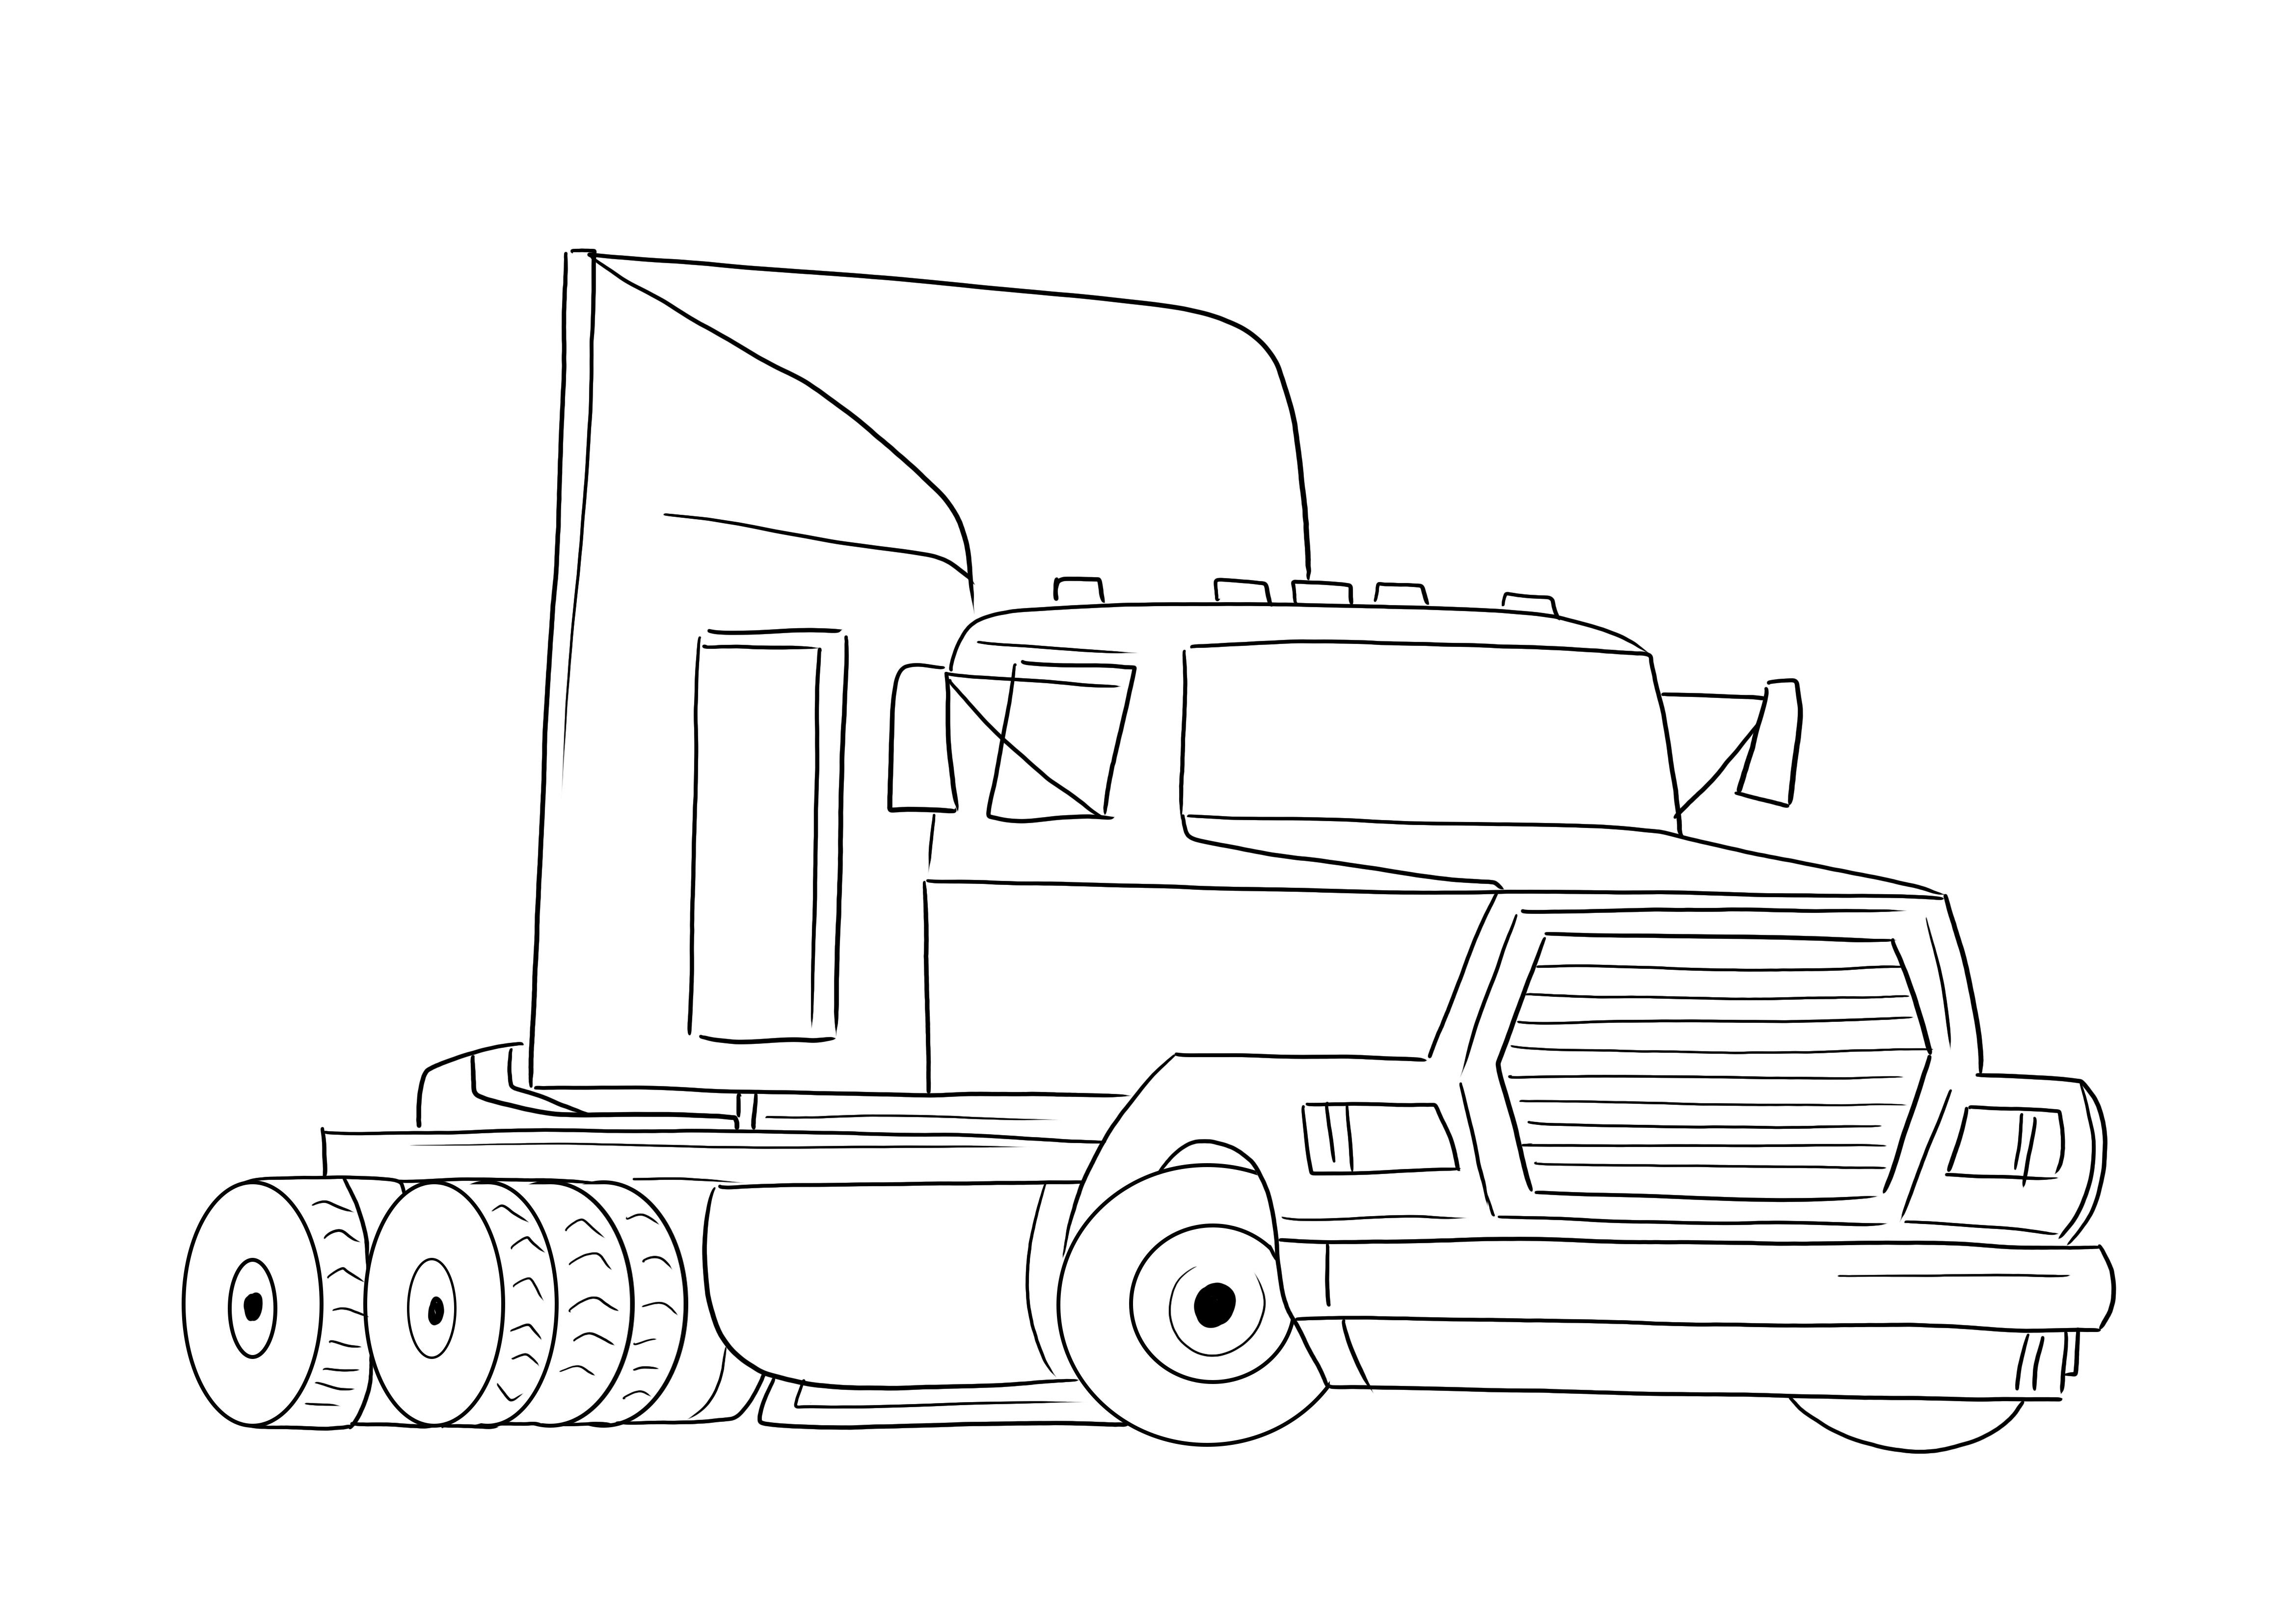 Download for free the Semi-trailer truck coloring picture for kids